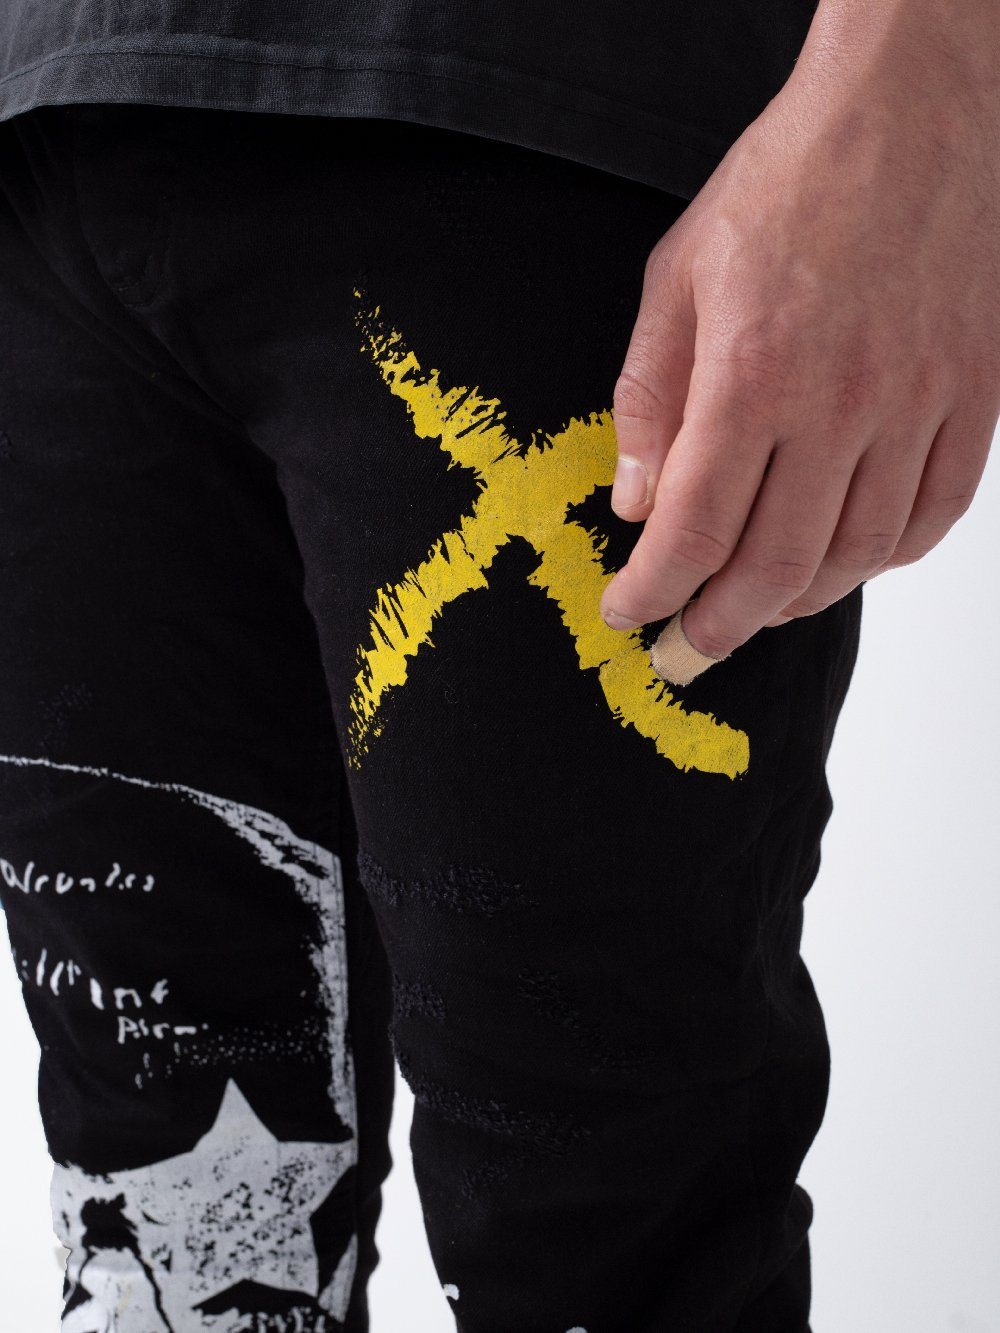 A man wearing a pair of black jeans with a yellow DEAN on them.